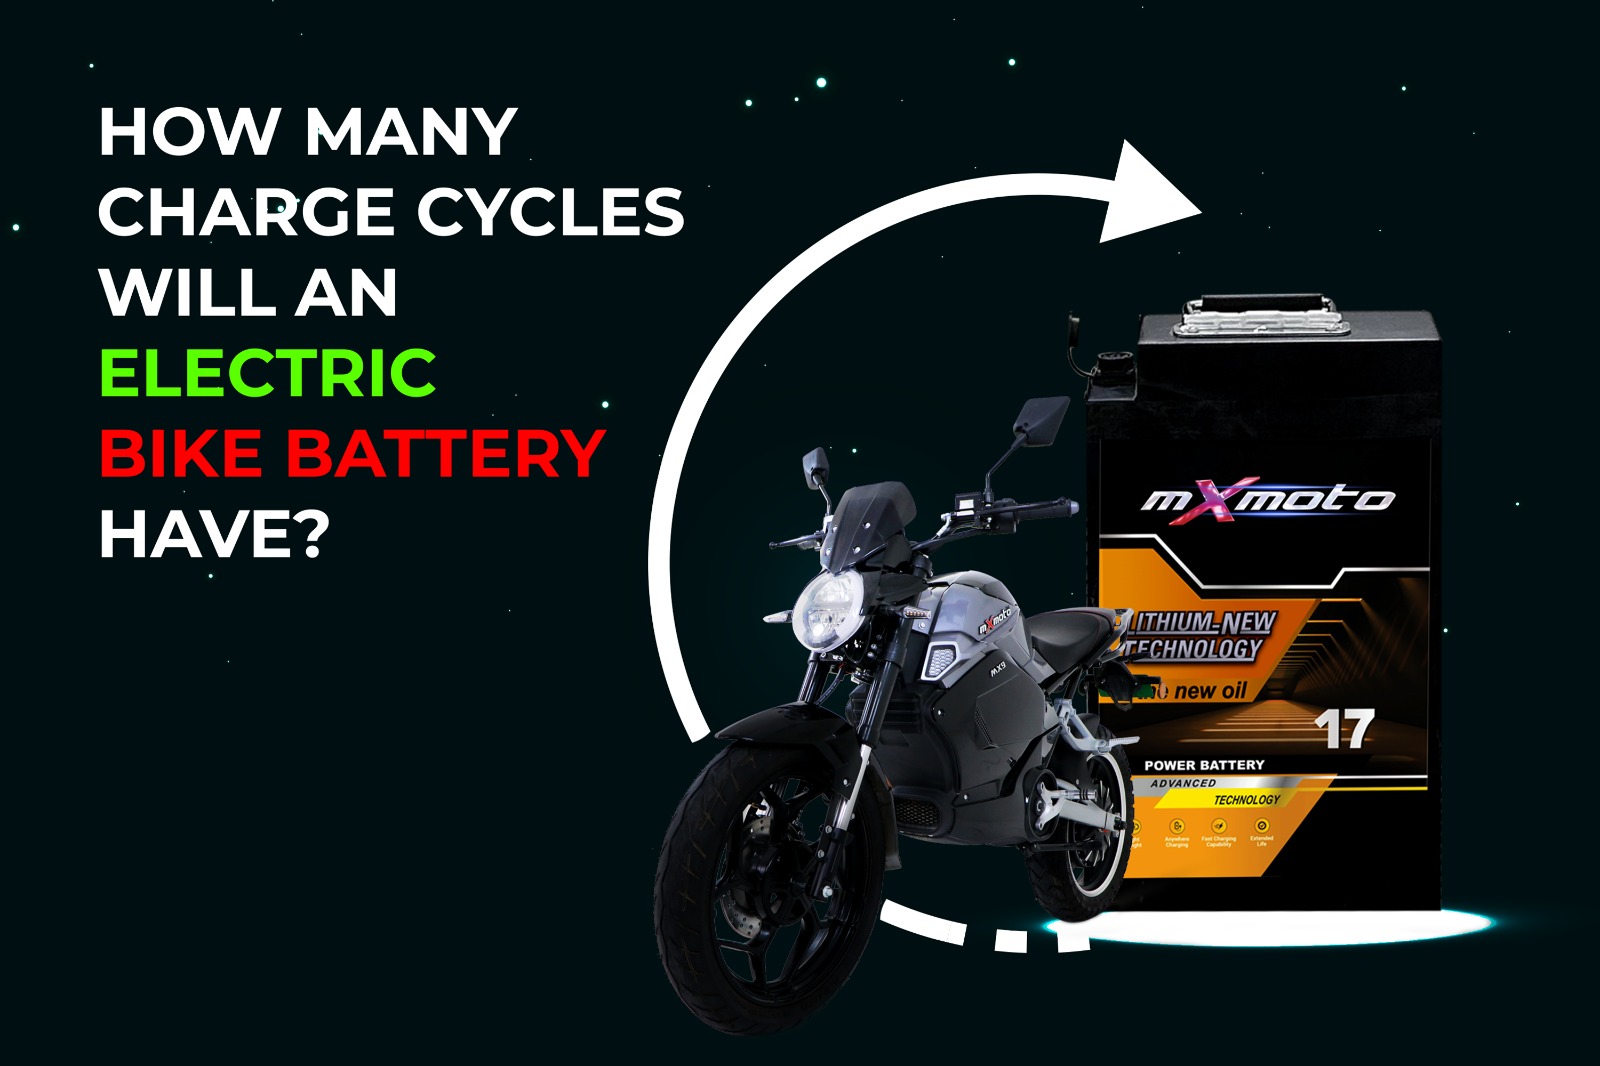 Charge Cycles of an Electric Bike Battery